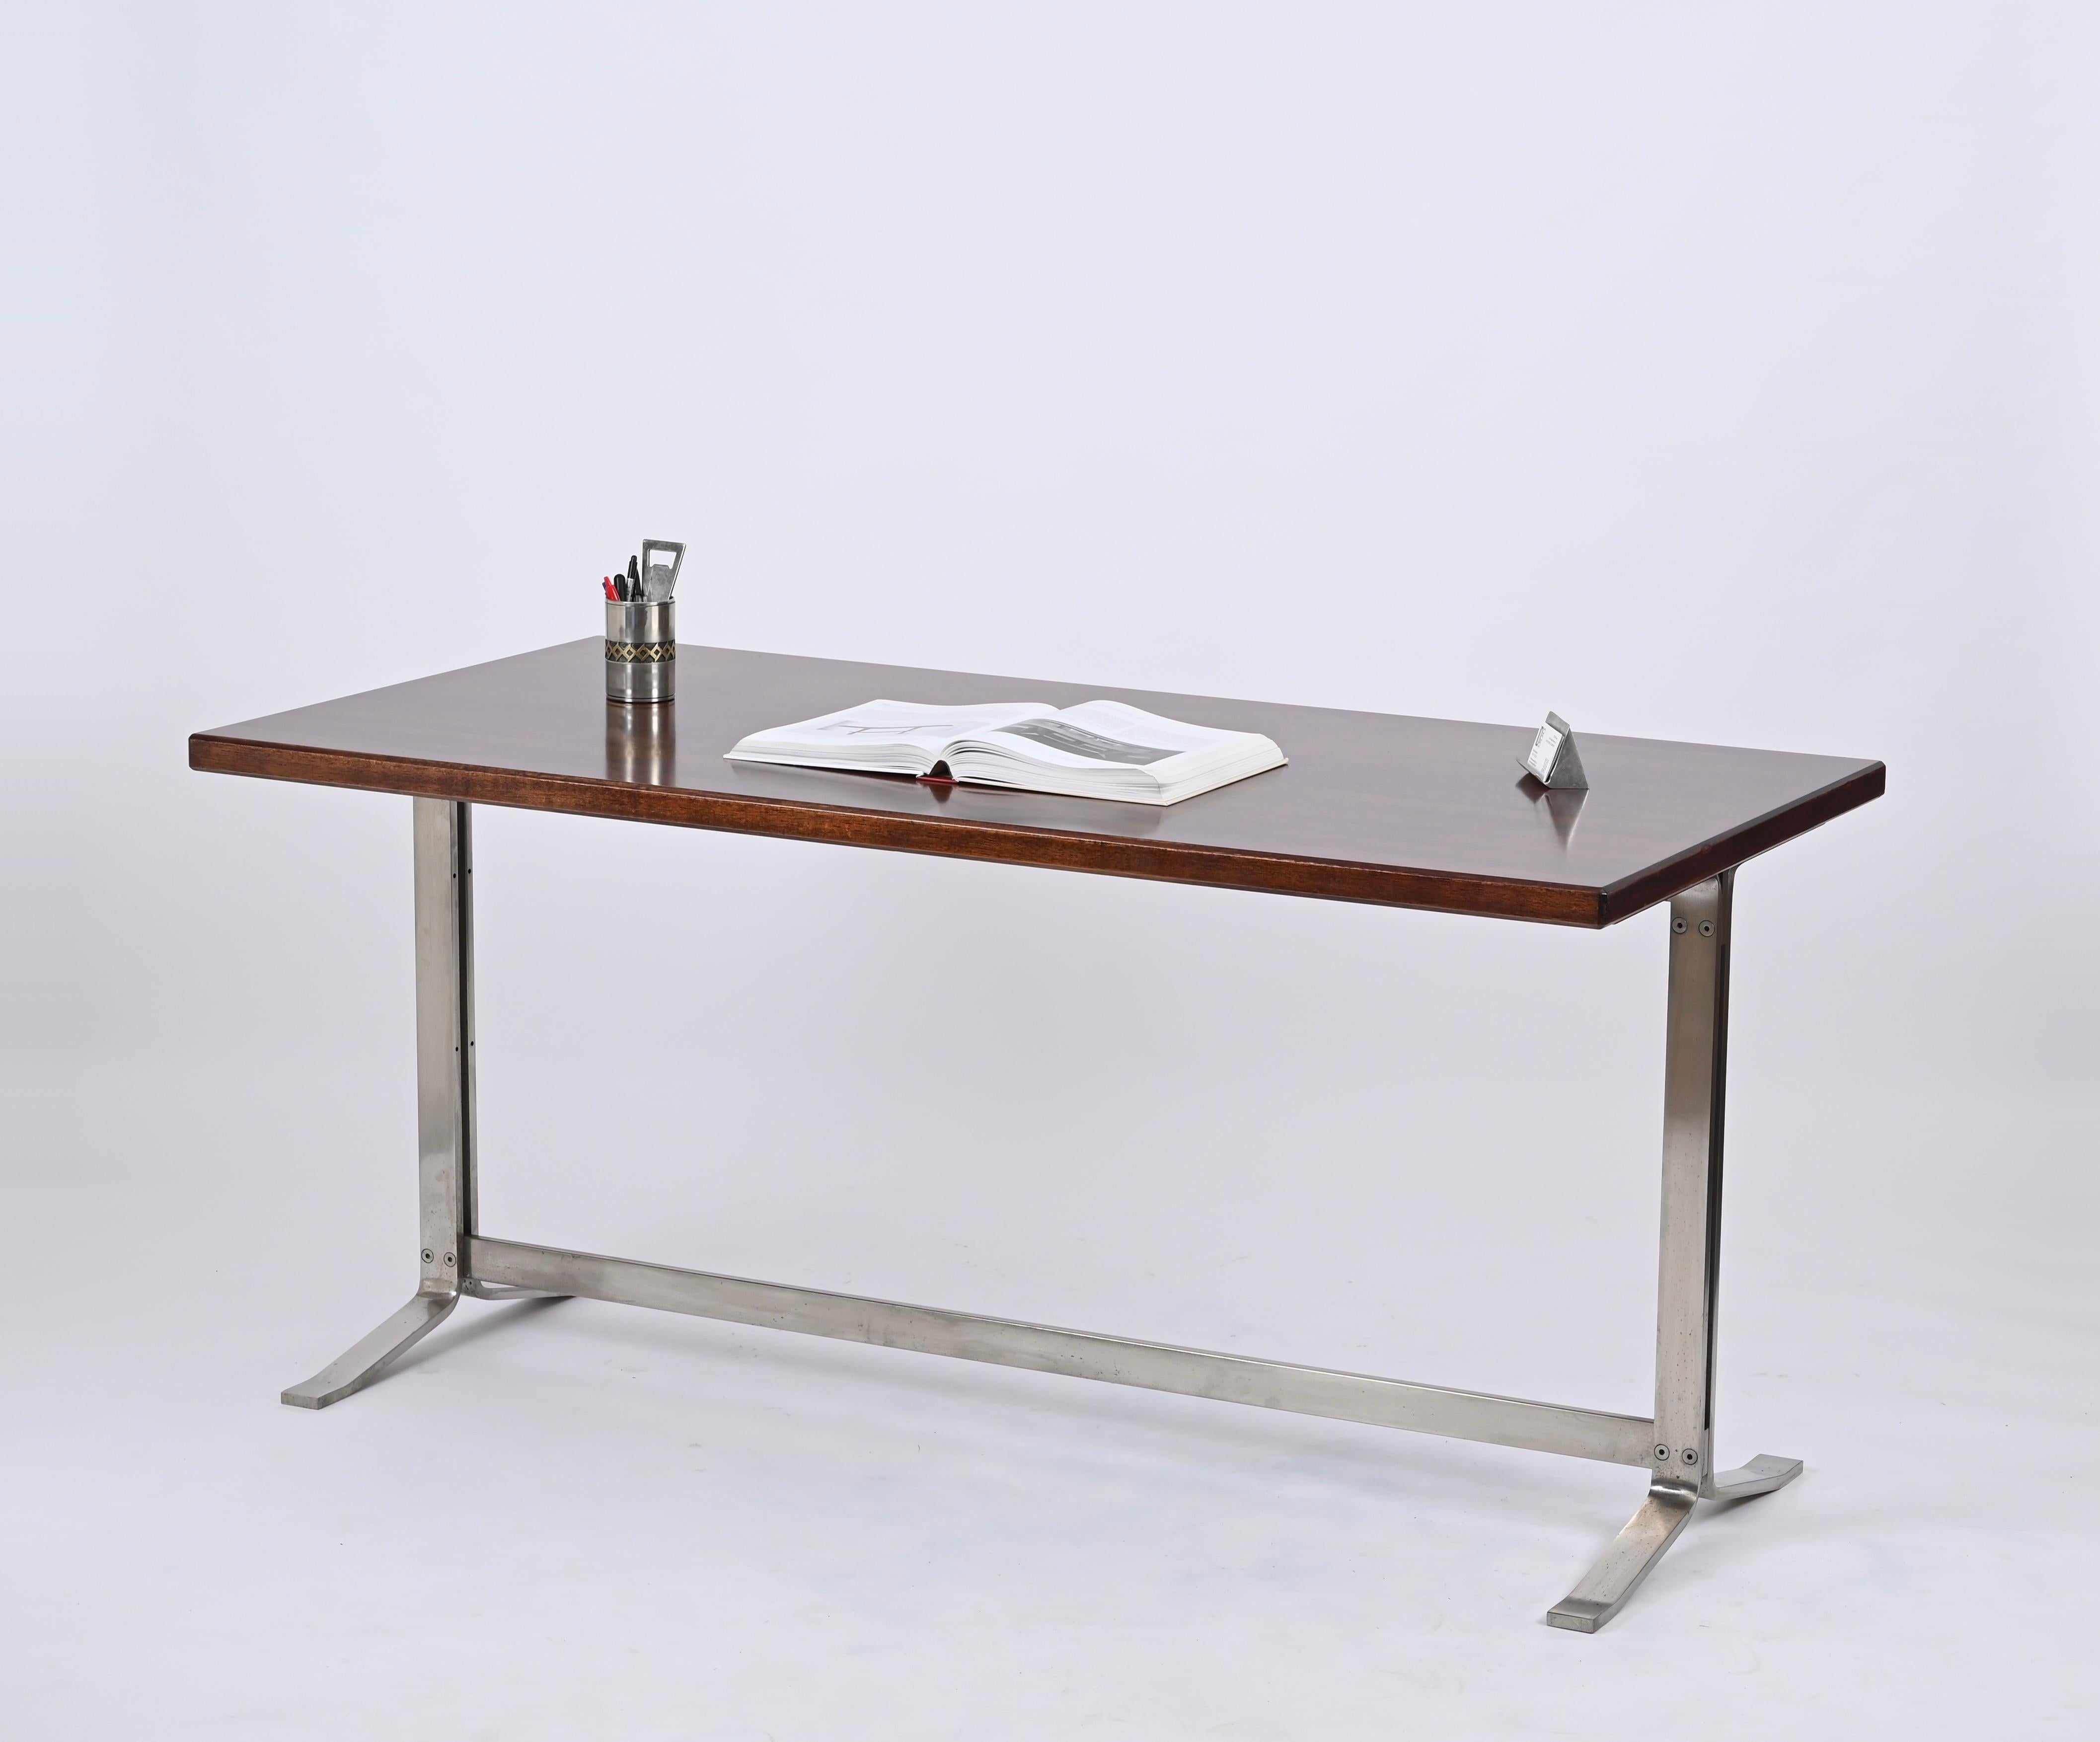 Midcentury Desk in Walnut and Steel by Moscatelli for Formanova, Italy, 1965 For Sale 1